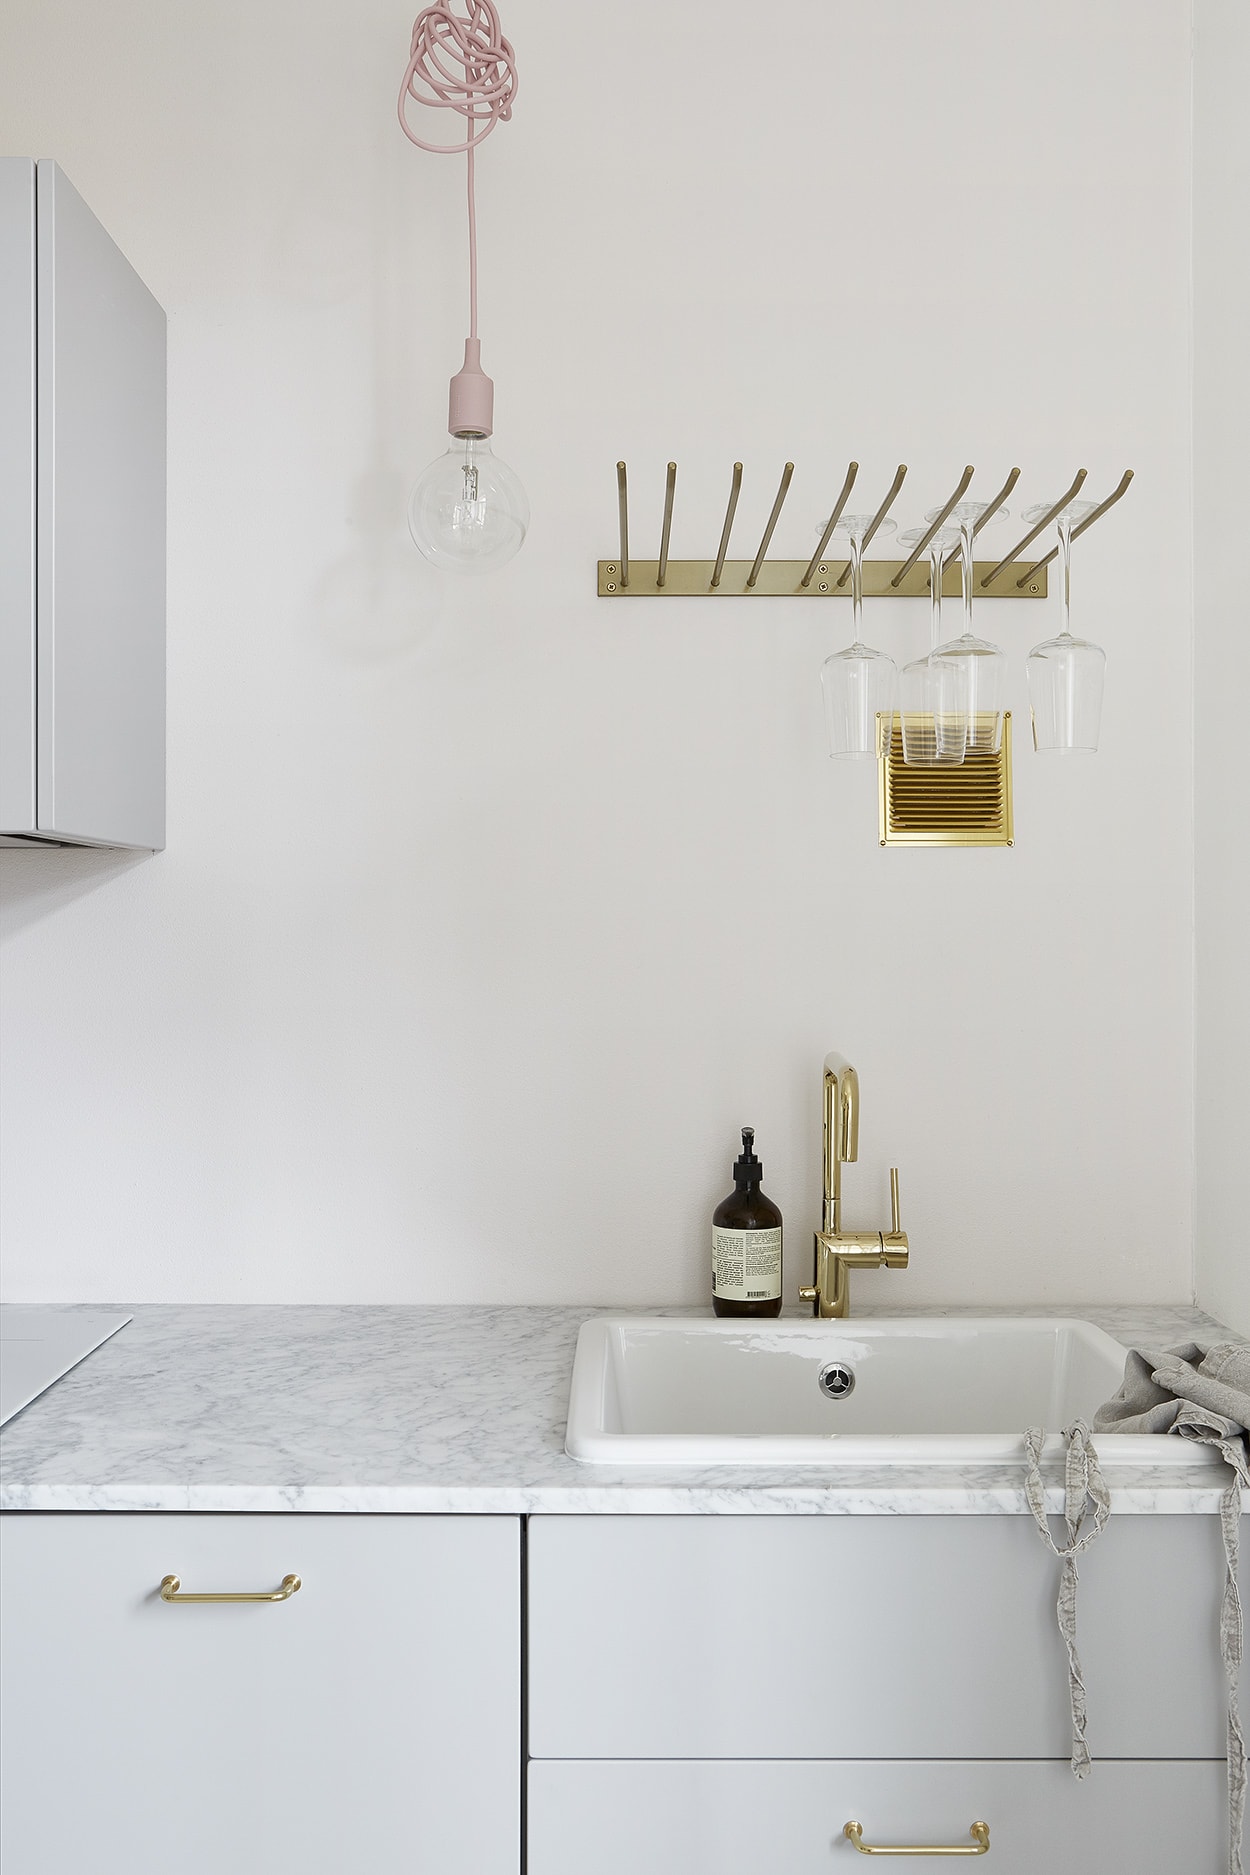 Home in brass and blush pink - via Coco Lapine Design